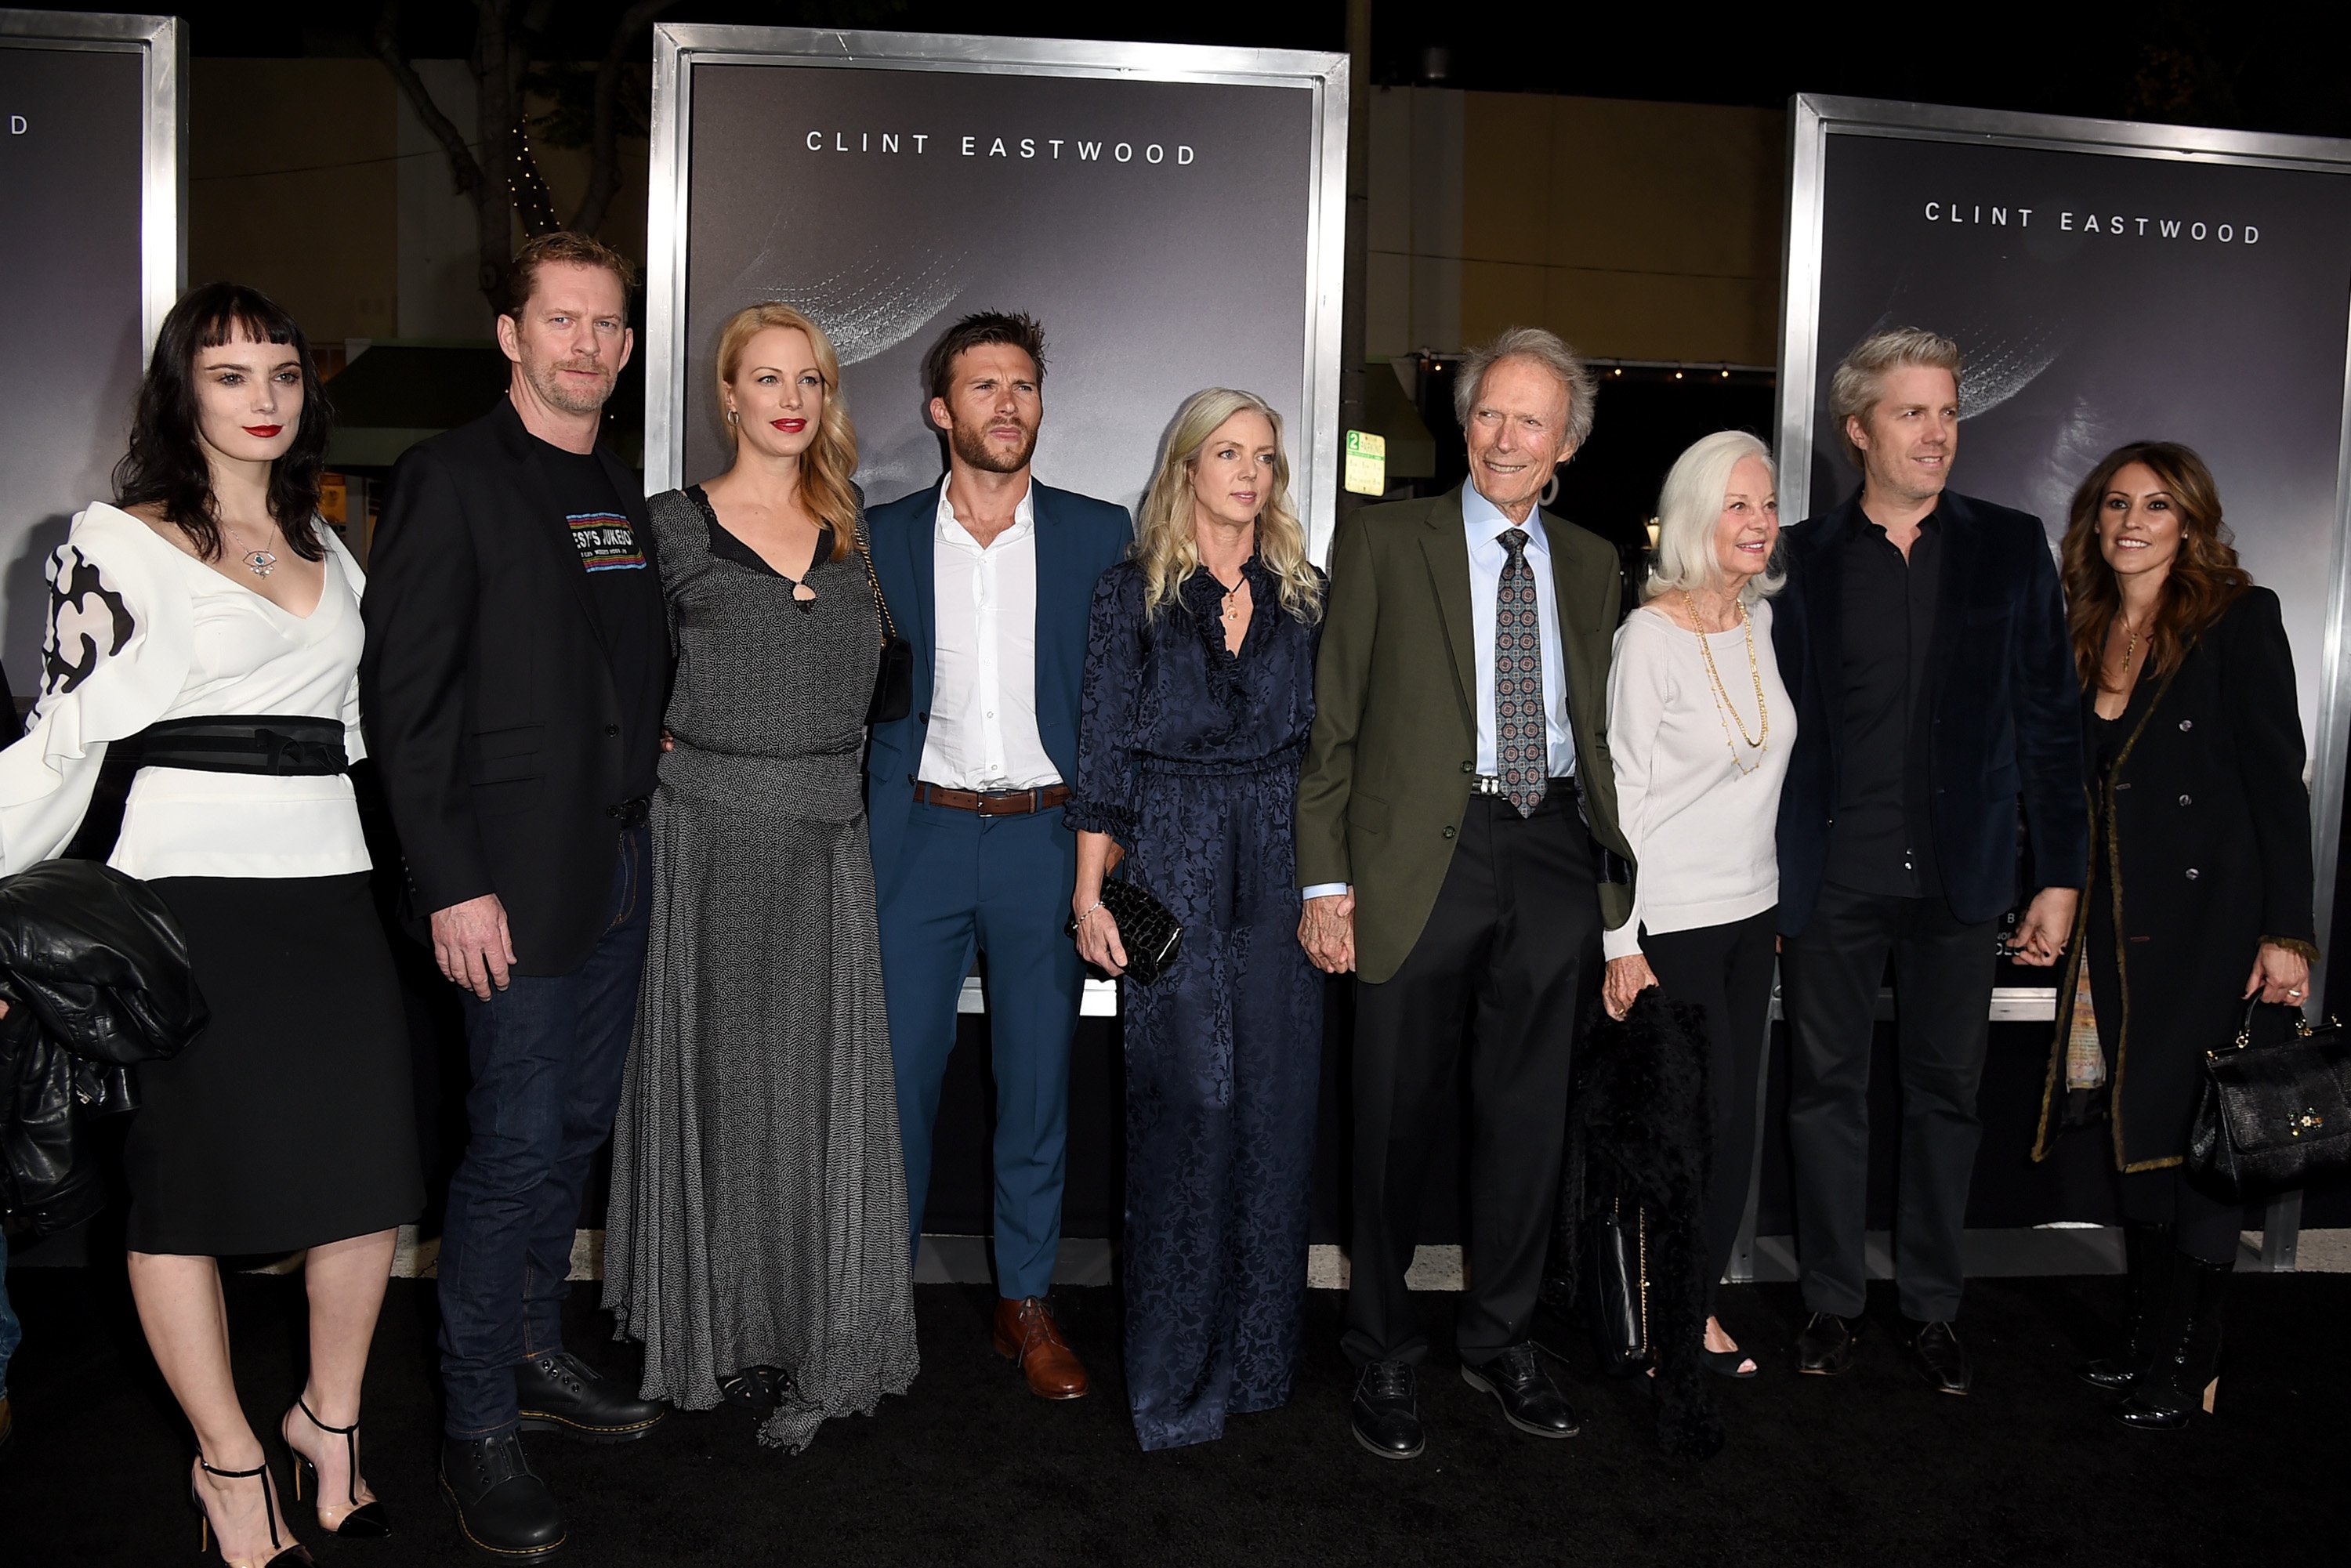 (L-R) Graylen Eastwood, Stacy Poitras, Alison Eastwood, Scott Eastwood, Christina Sandera, Clint Eastwood, Maggie Johnson, Kyle Eastwood and Cynthia Ramirez pose at the premiere of "The Mule" at the Village Theatre on December 10, 2018 in Los Angeles, California | Photo: Getty Images